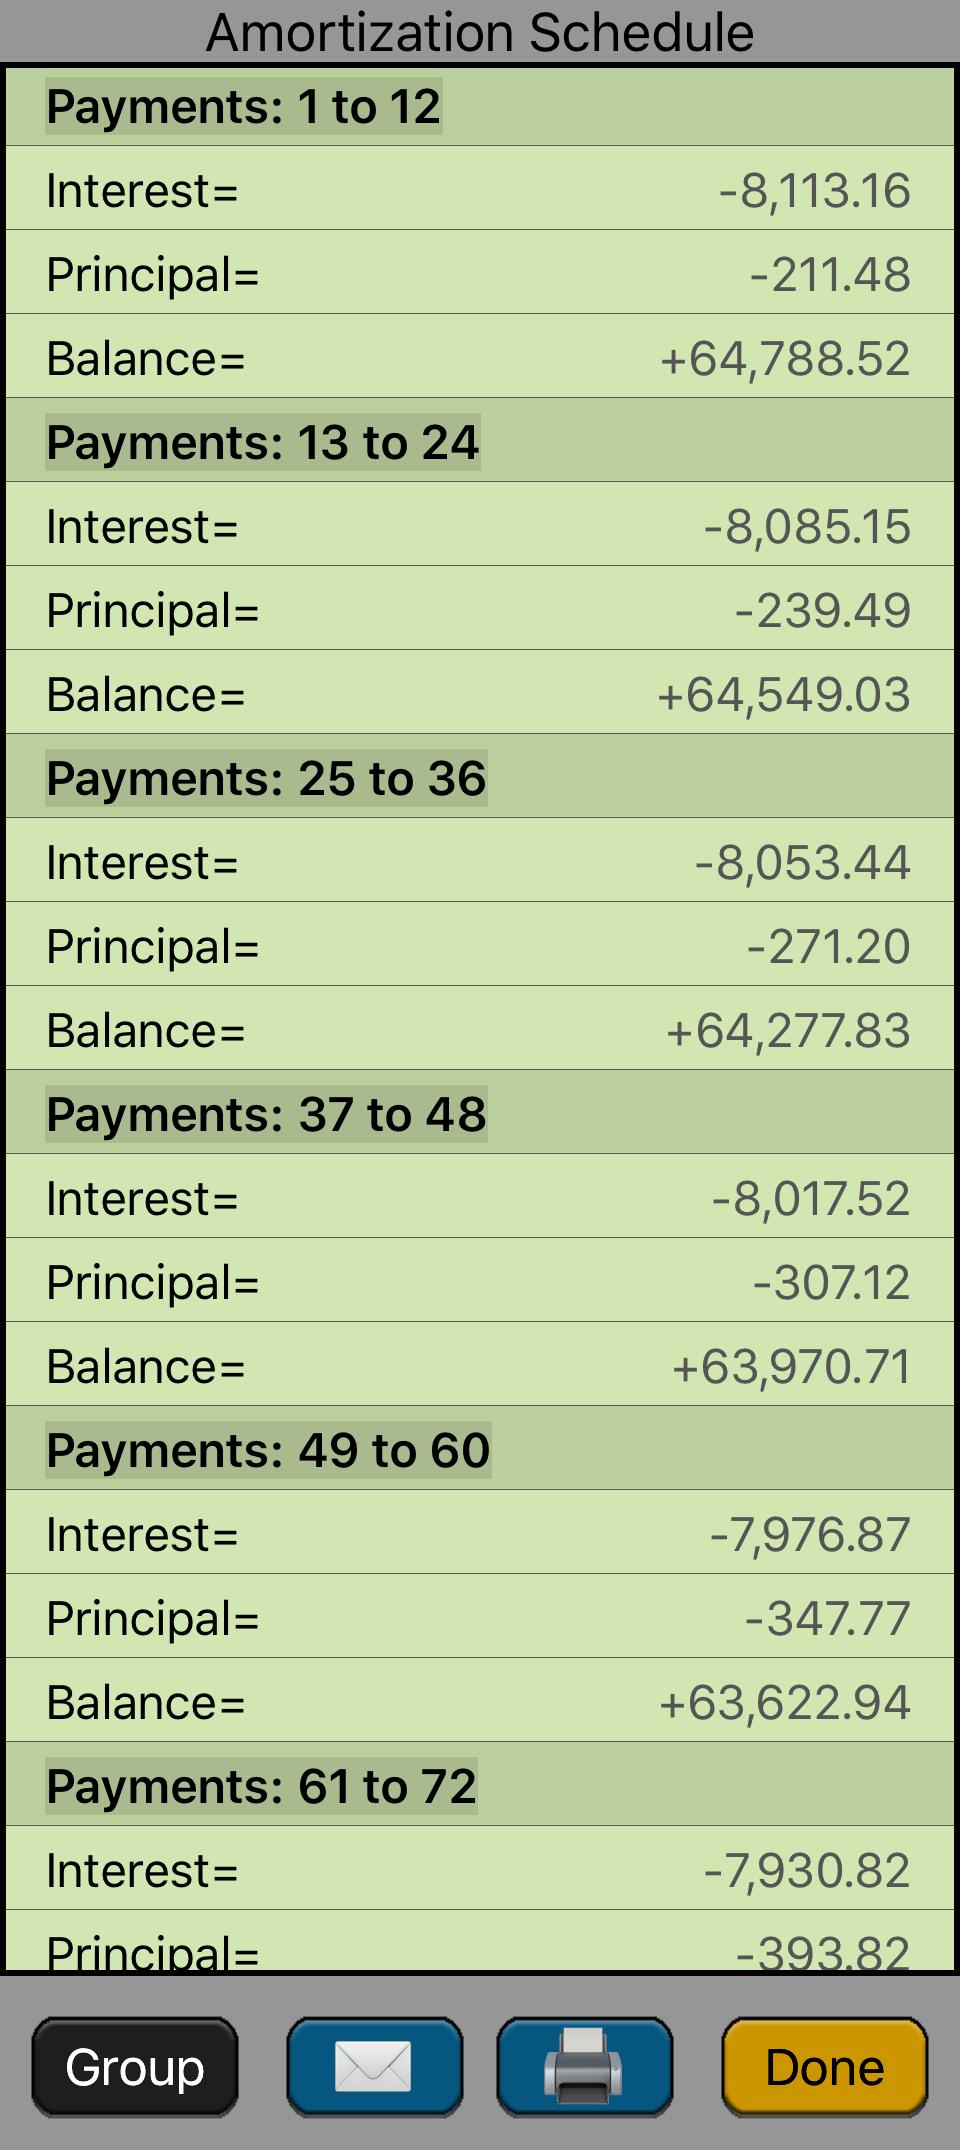 Periods Amortized Interest amount Amortization amount Remaining balance Shows the Grouping input view to group payment in the amortization schedule Close the